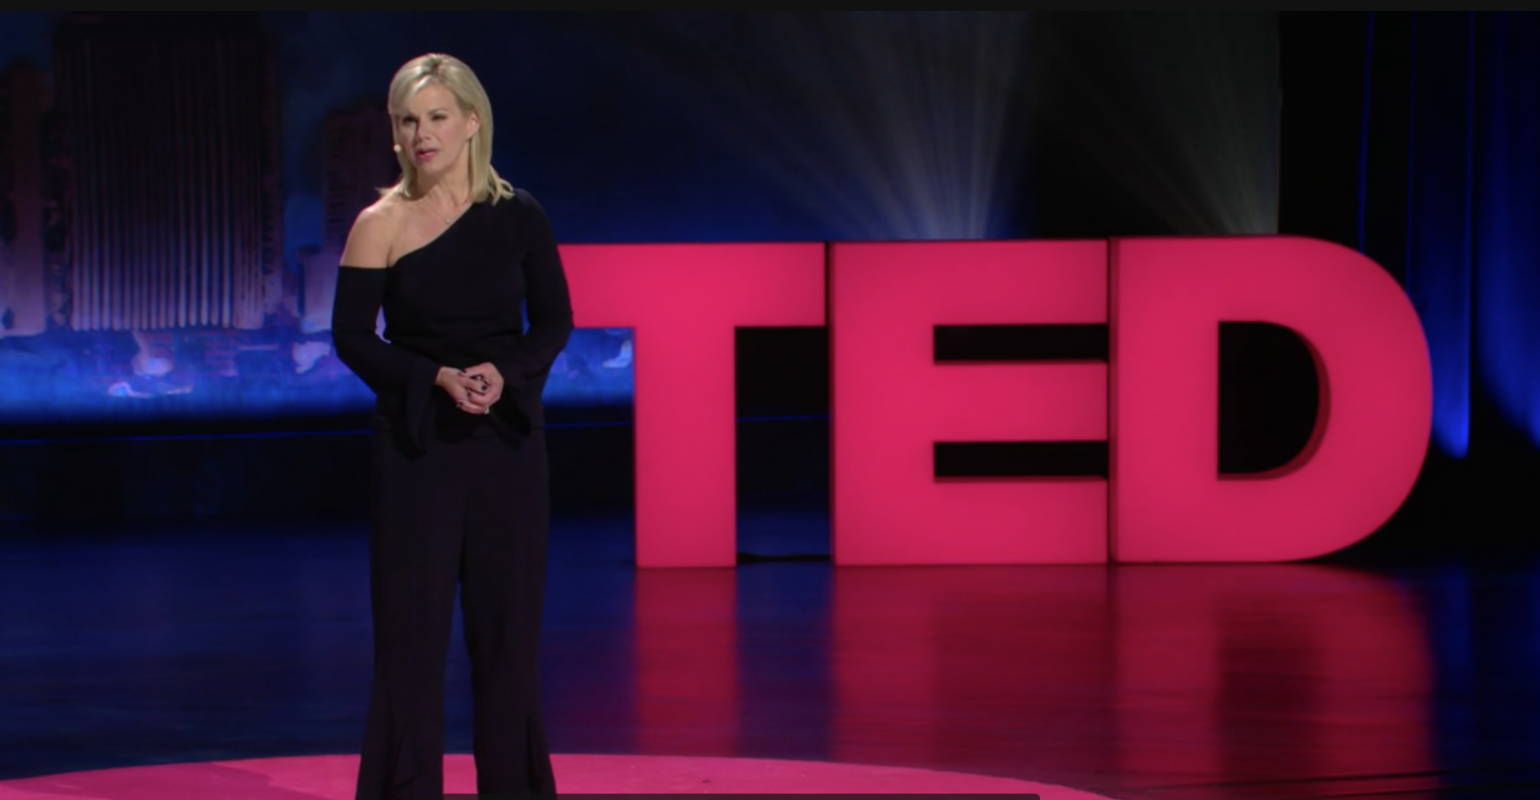 Ted Talks Events Struggle With Sexual Harassment Meetingsnet